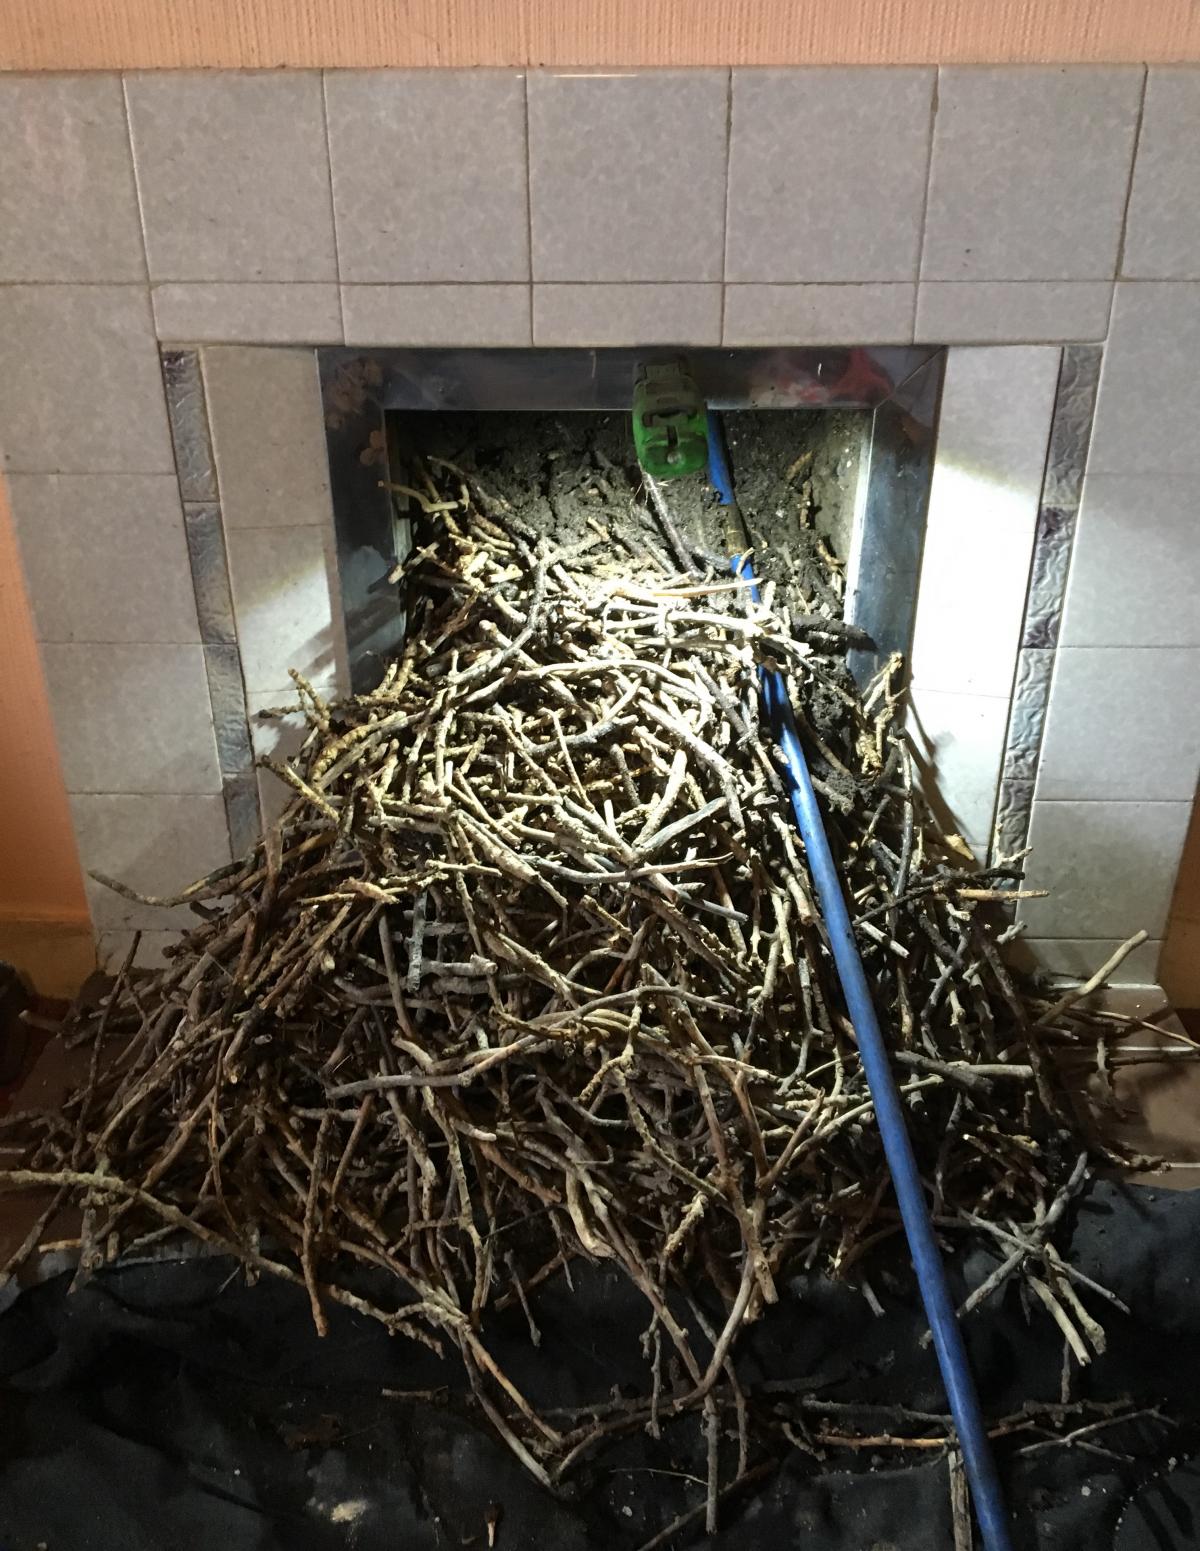 Fireplace Smoke Guard Unique Bird S Nest Removed From Chimney • Cleaner Chimneys